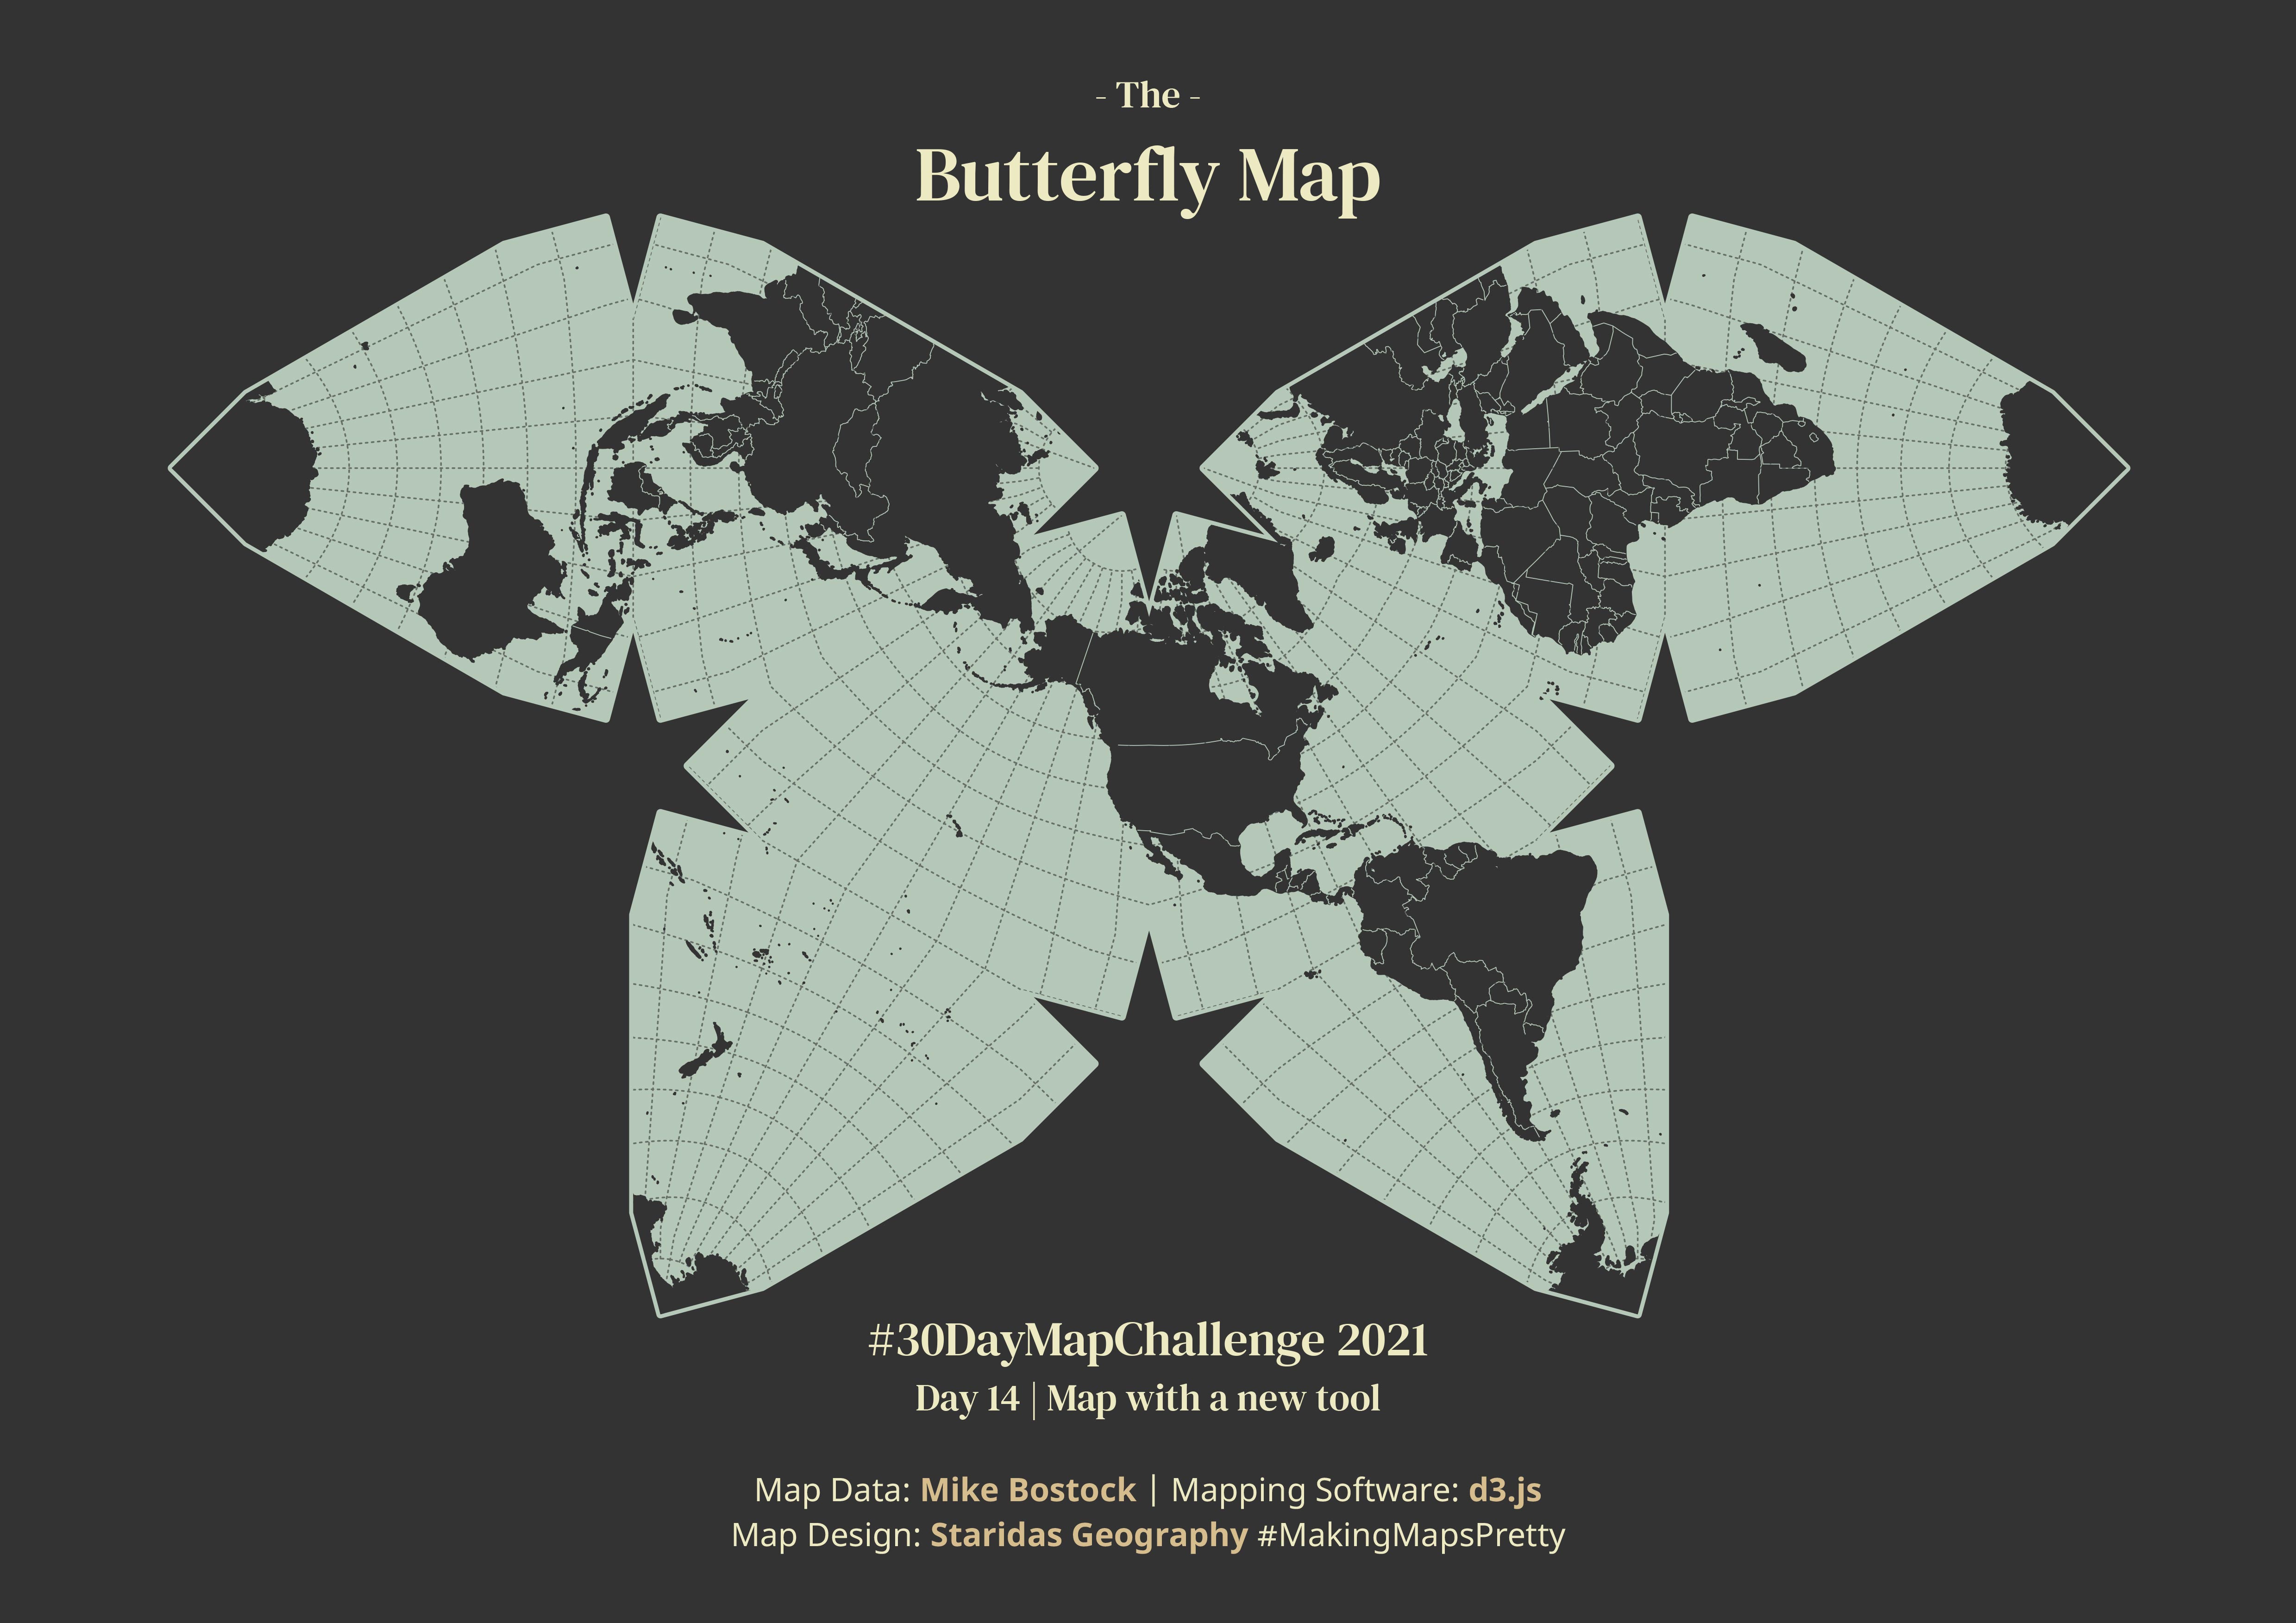 The Butterfly Map